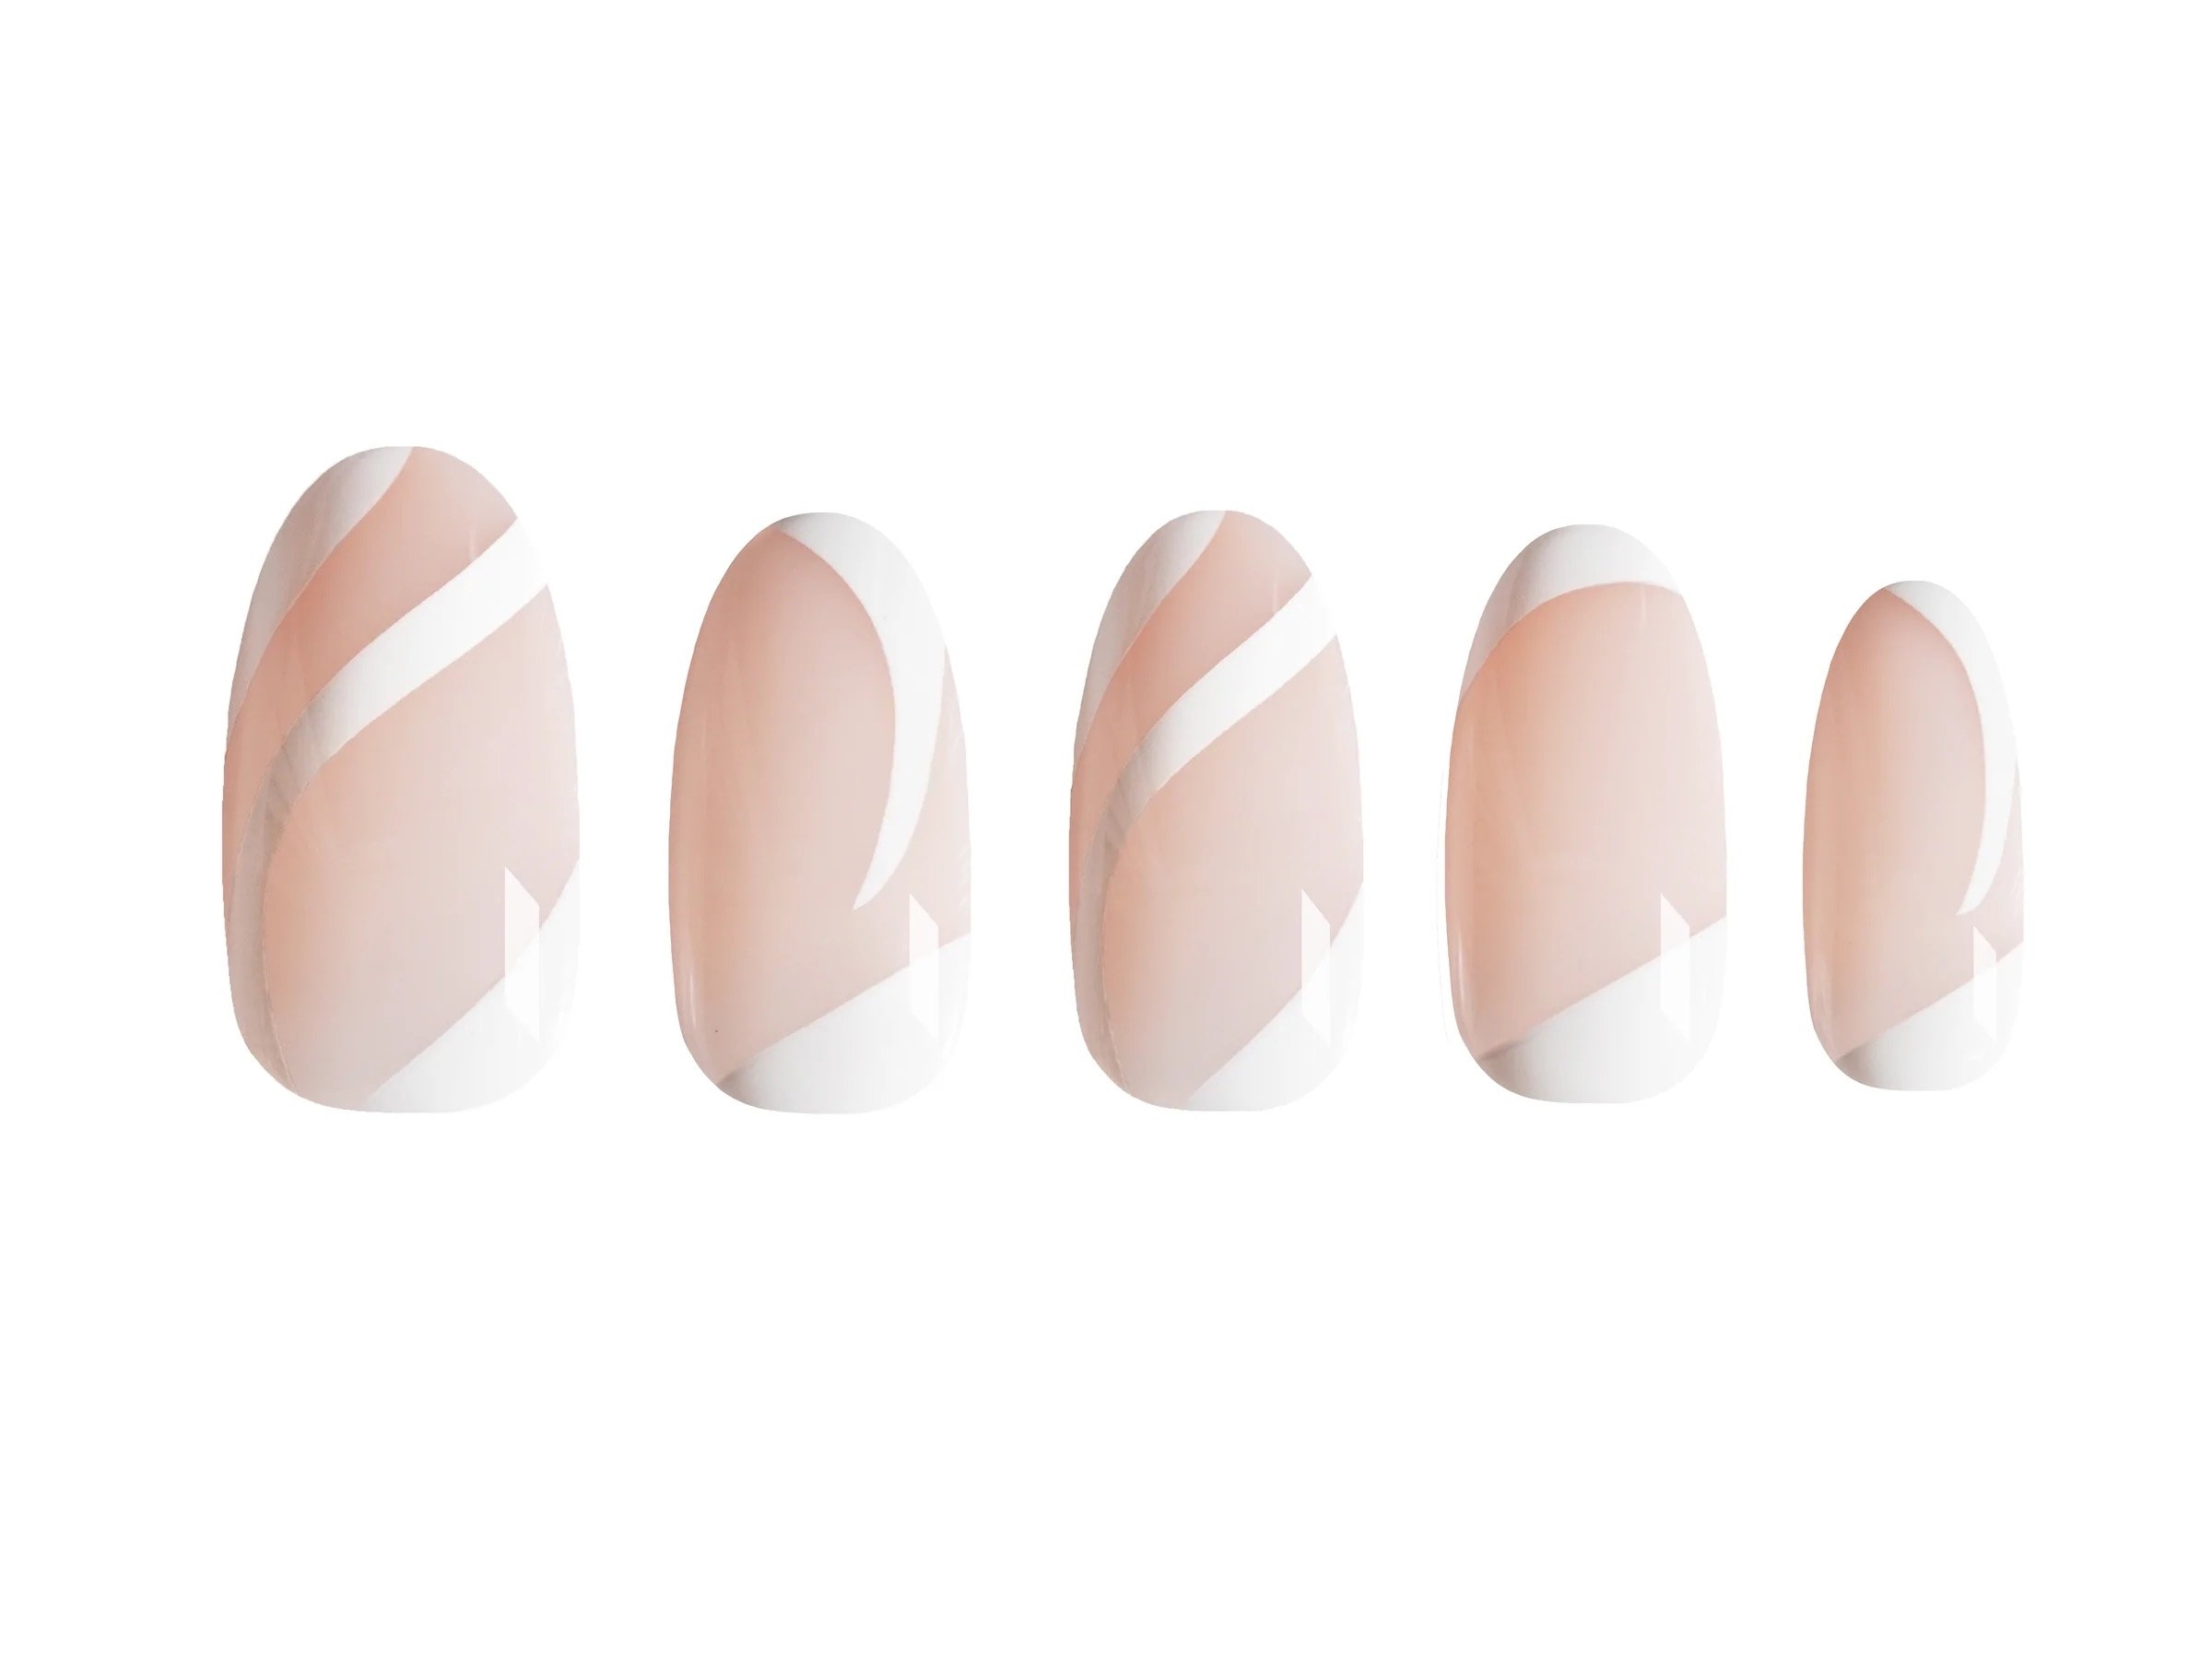 a set of press on nails on a white background. They are a light pink color with swooping white lines that follow the almond curve.